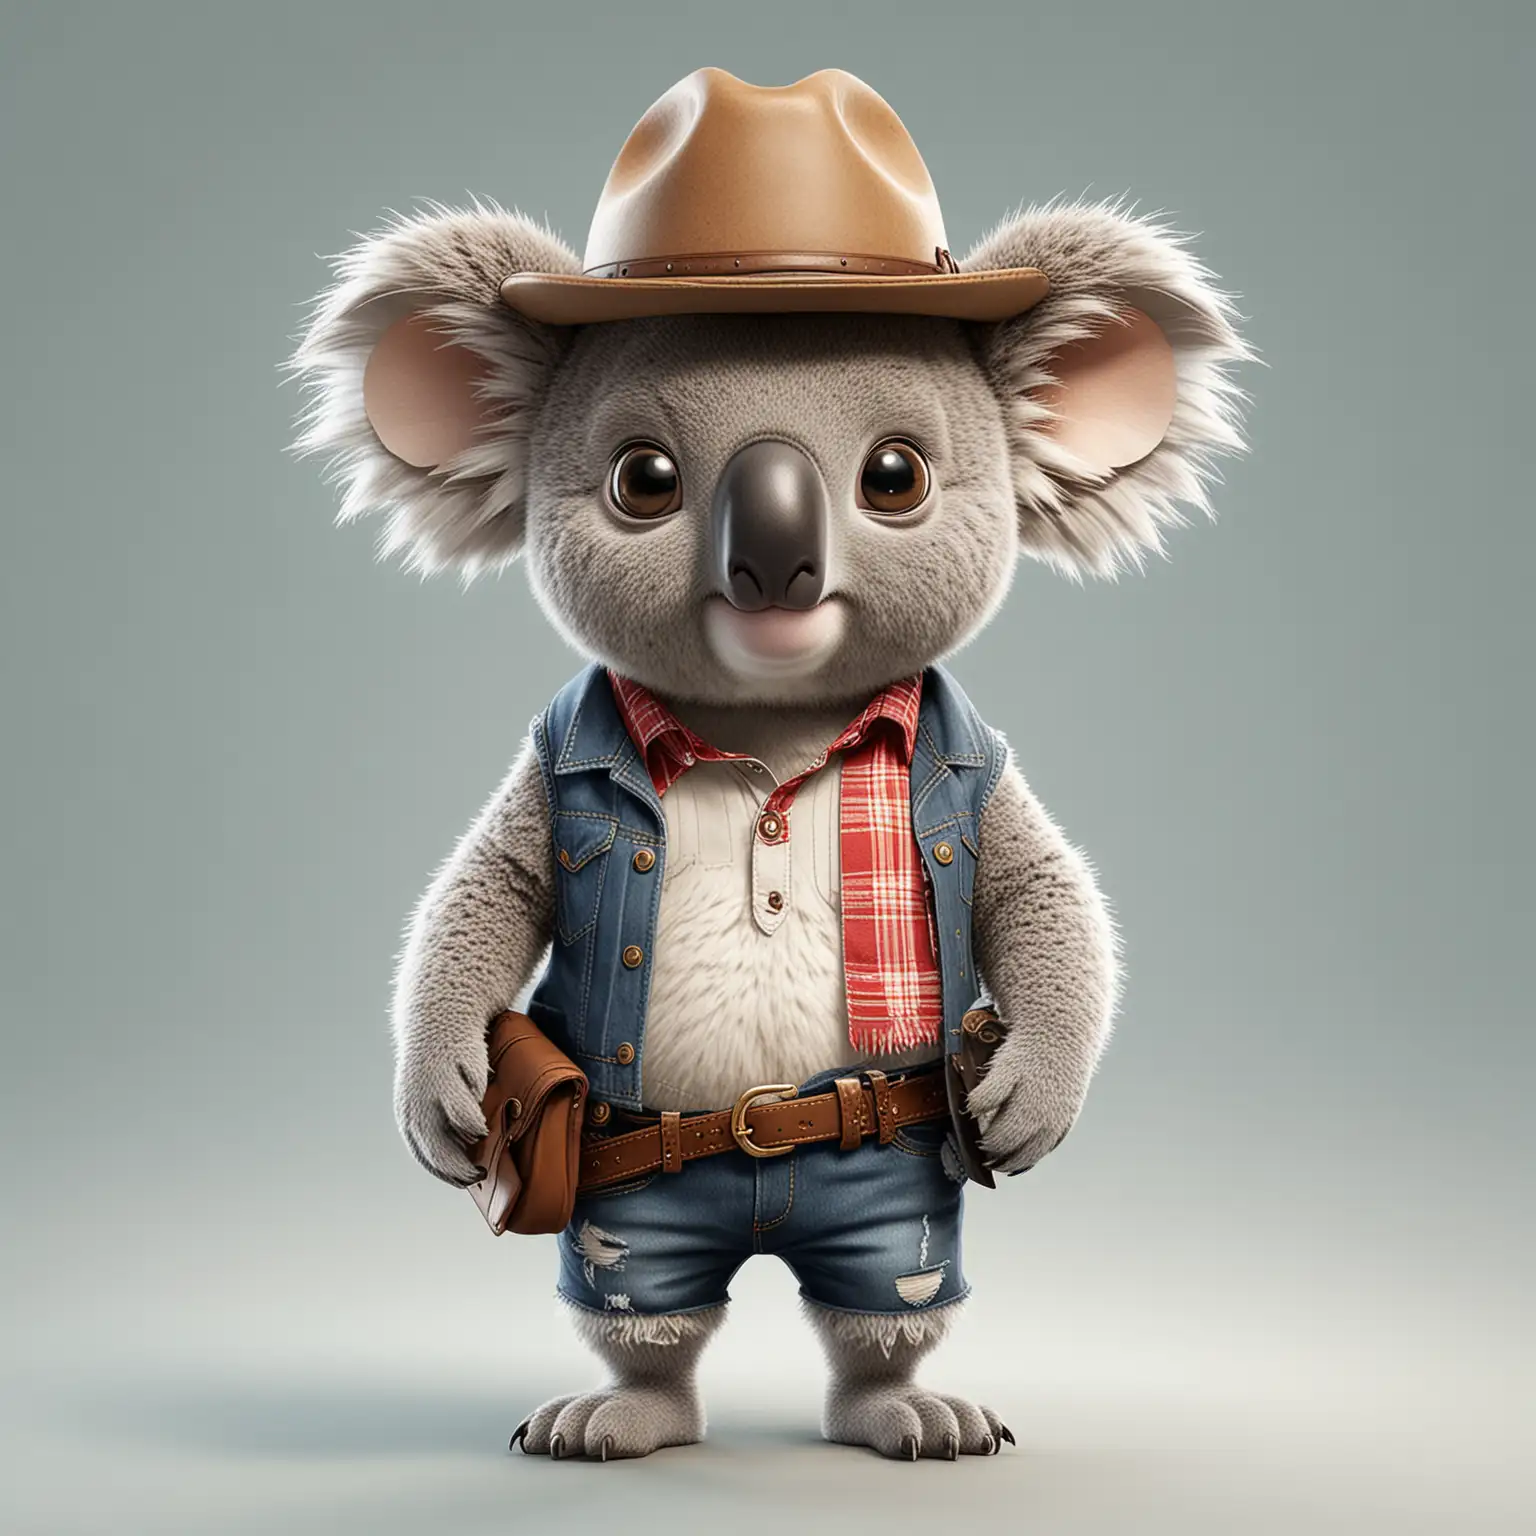 Adorable Cartoon Koala Wearing Cowboy Clothes on Clear Background